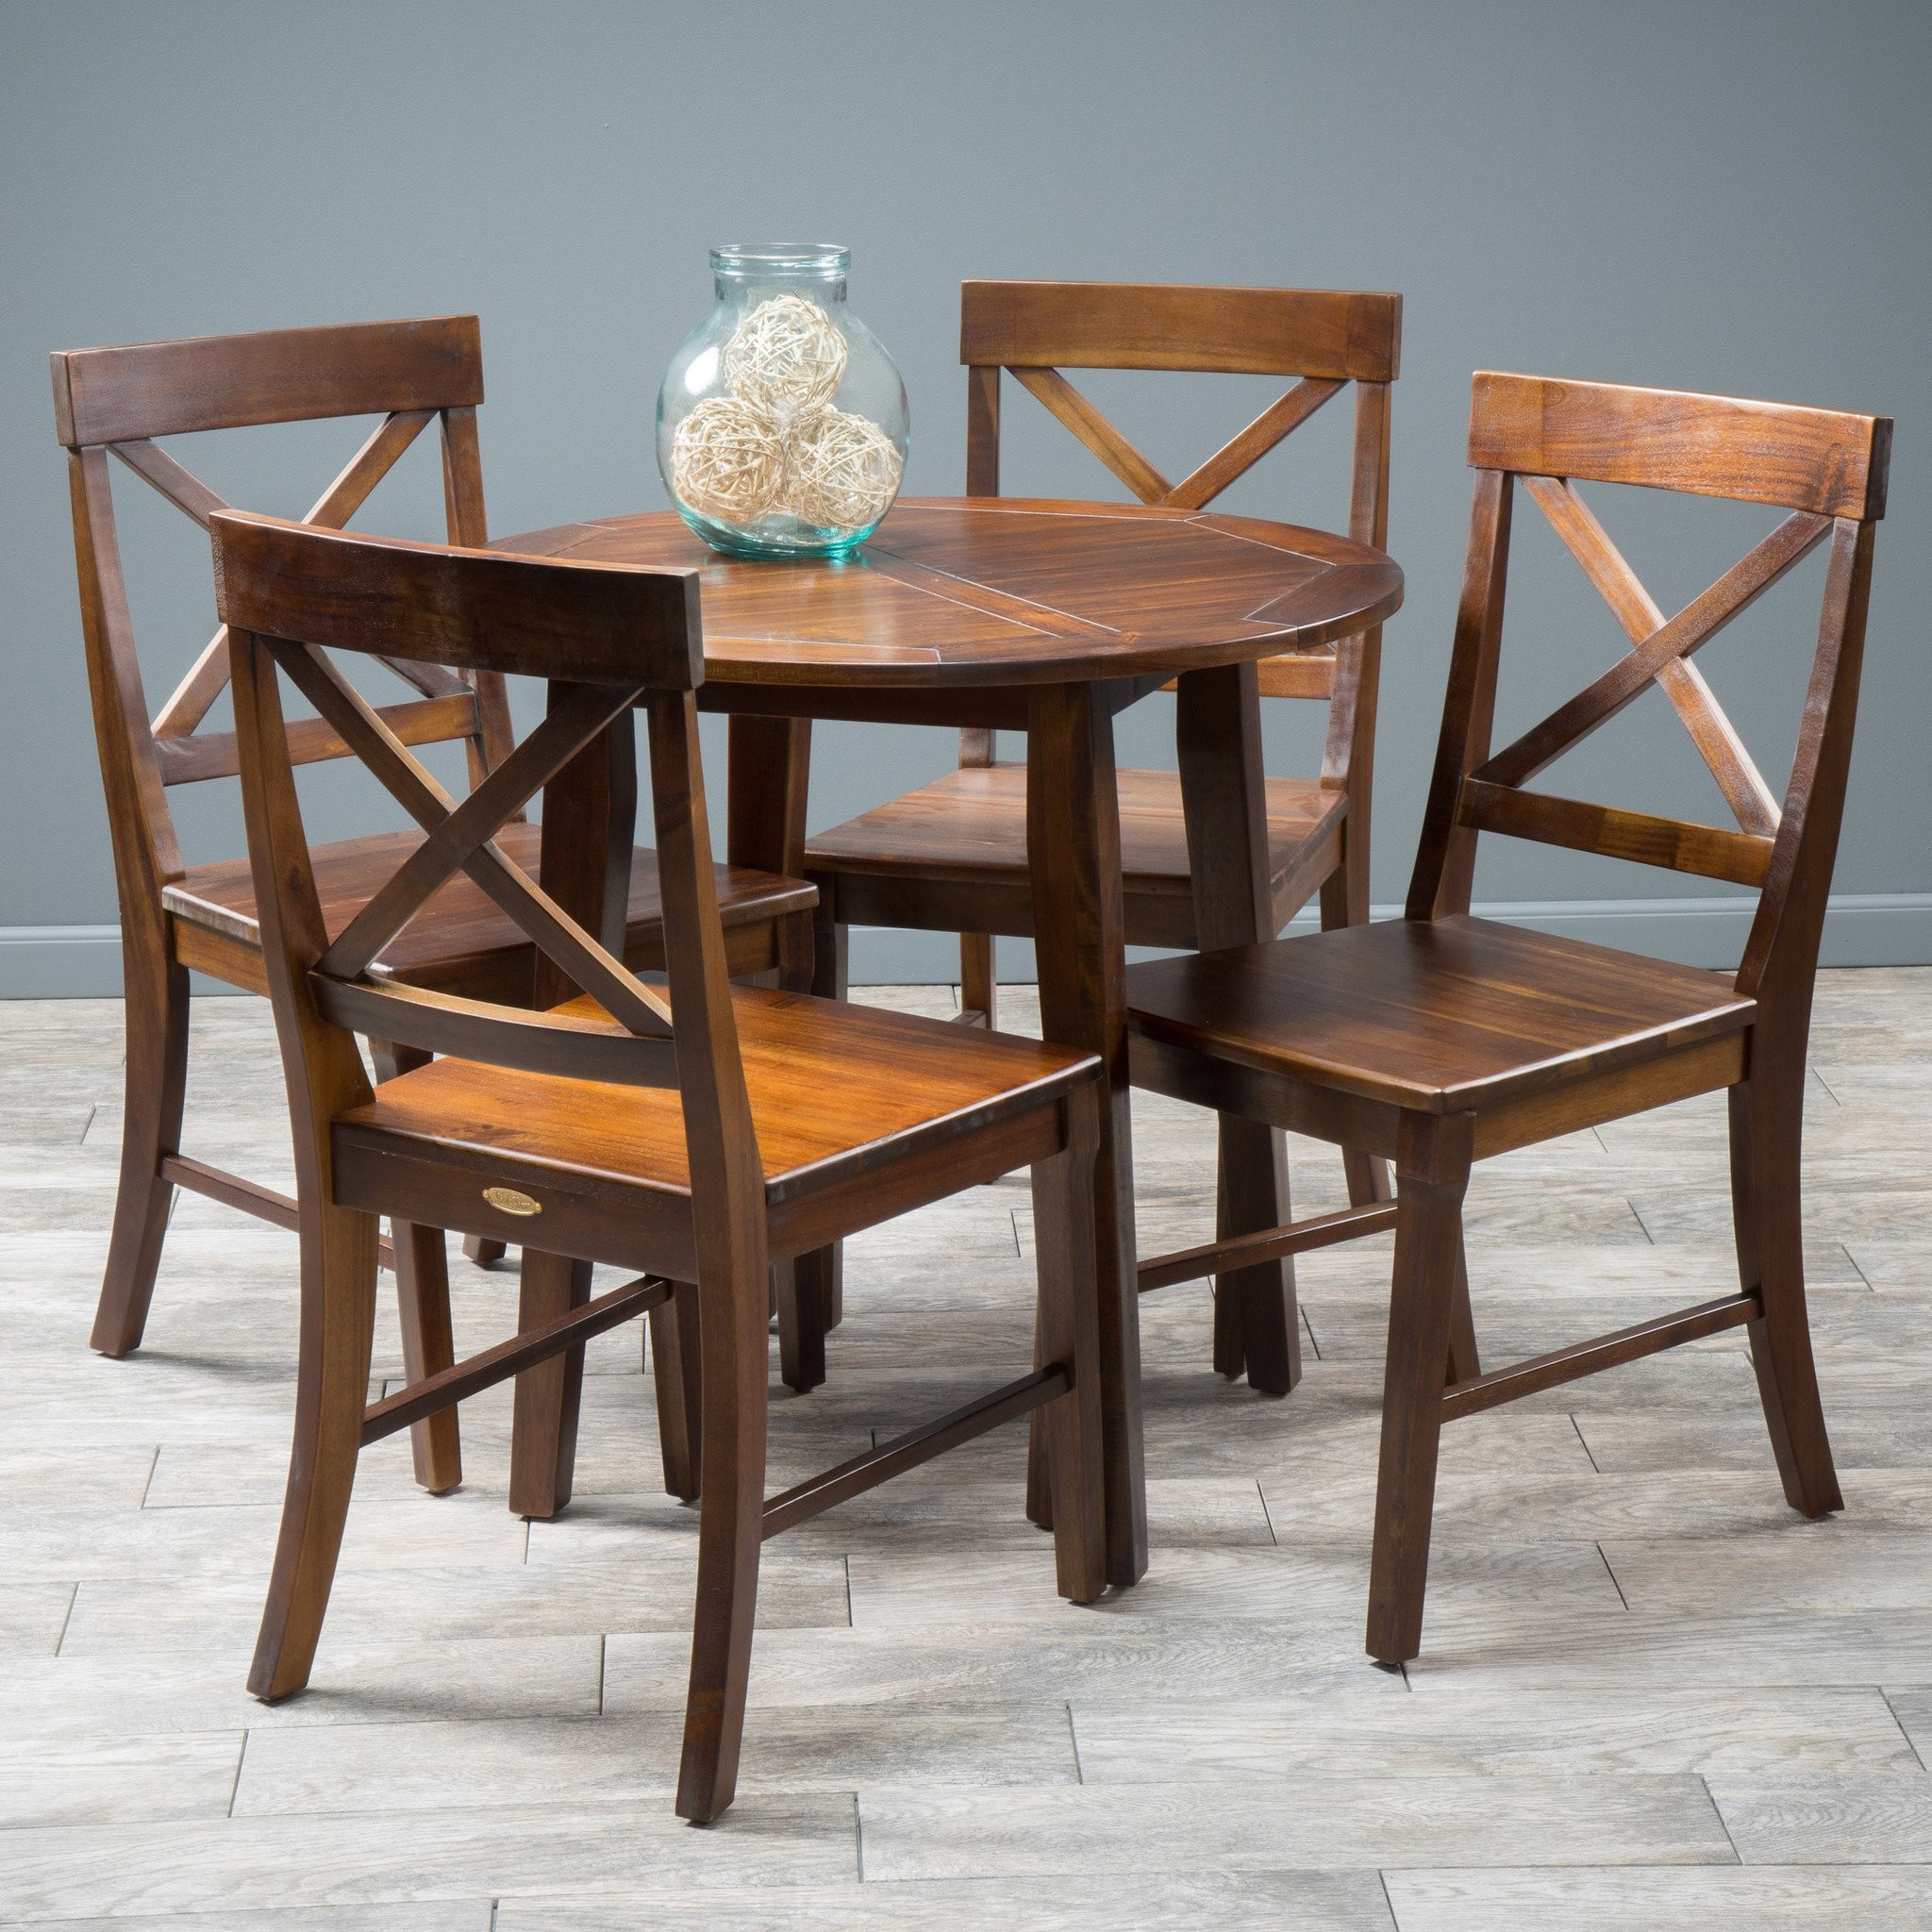 Potter 5pc Mahogany Stained Wood Round Table Dinin...